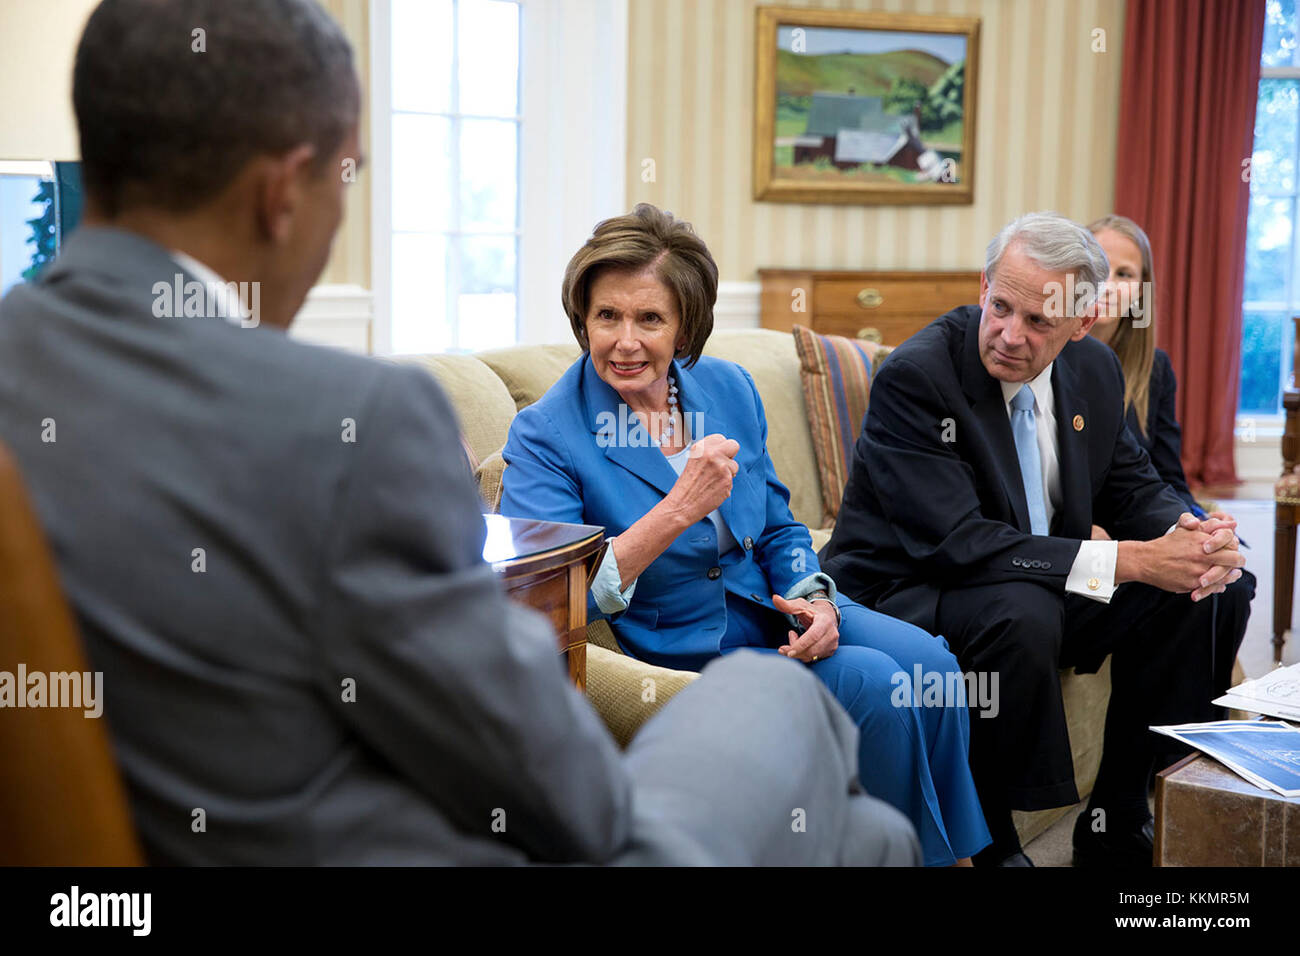 President Barack Obama meets with House Minority Leader Nancy Pelosi, D-Calif. and Democratic Congressional Campaign Committee Chairman Rep. Steve Israel, D-N.Y. in the Oval Office, July 31, 2014. Kelly Ward, Executive Director of the DCCC, seated at right. Stock Photo